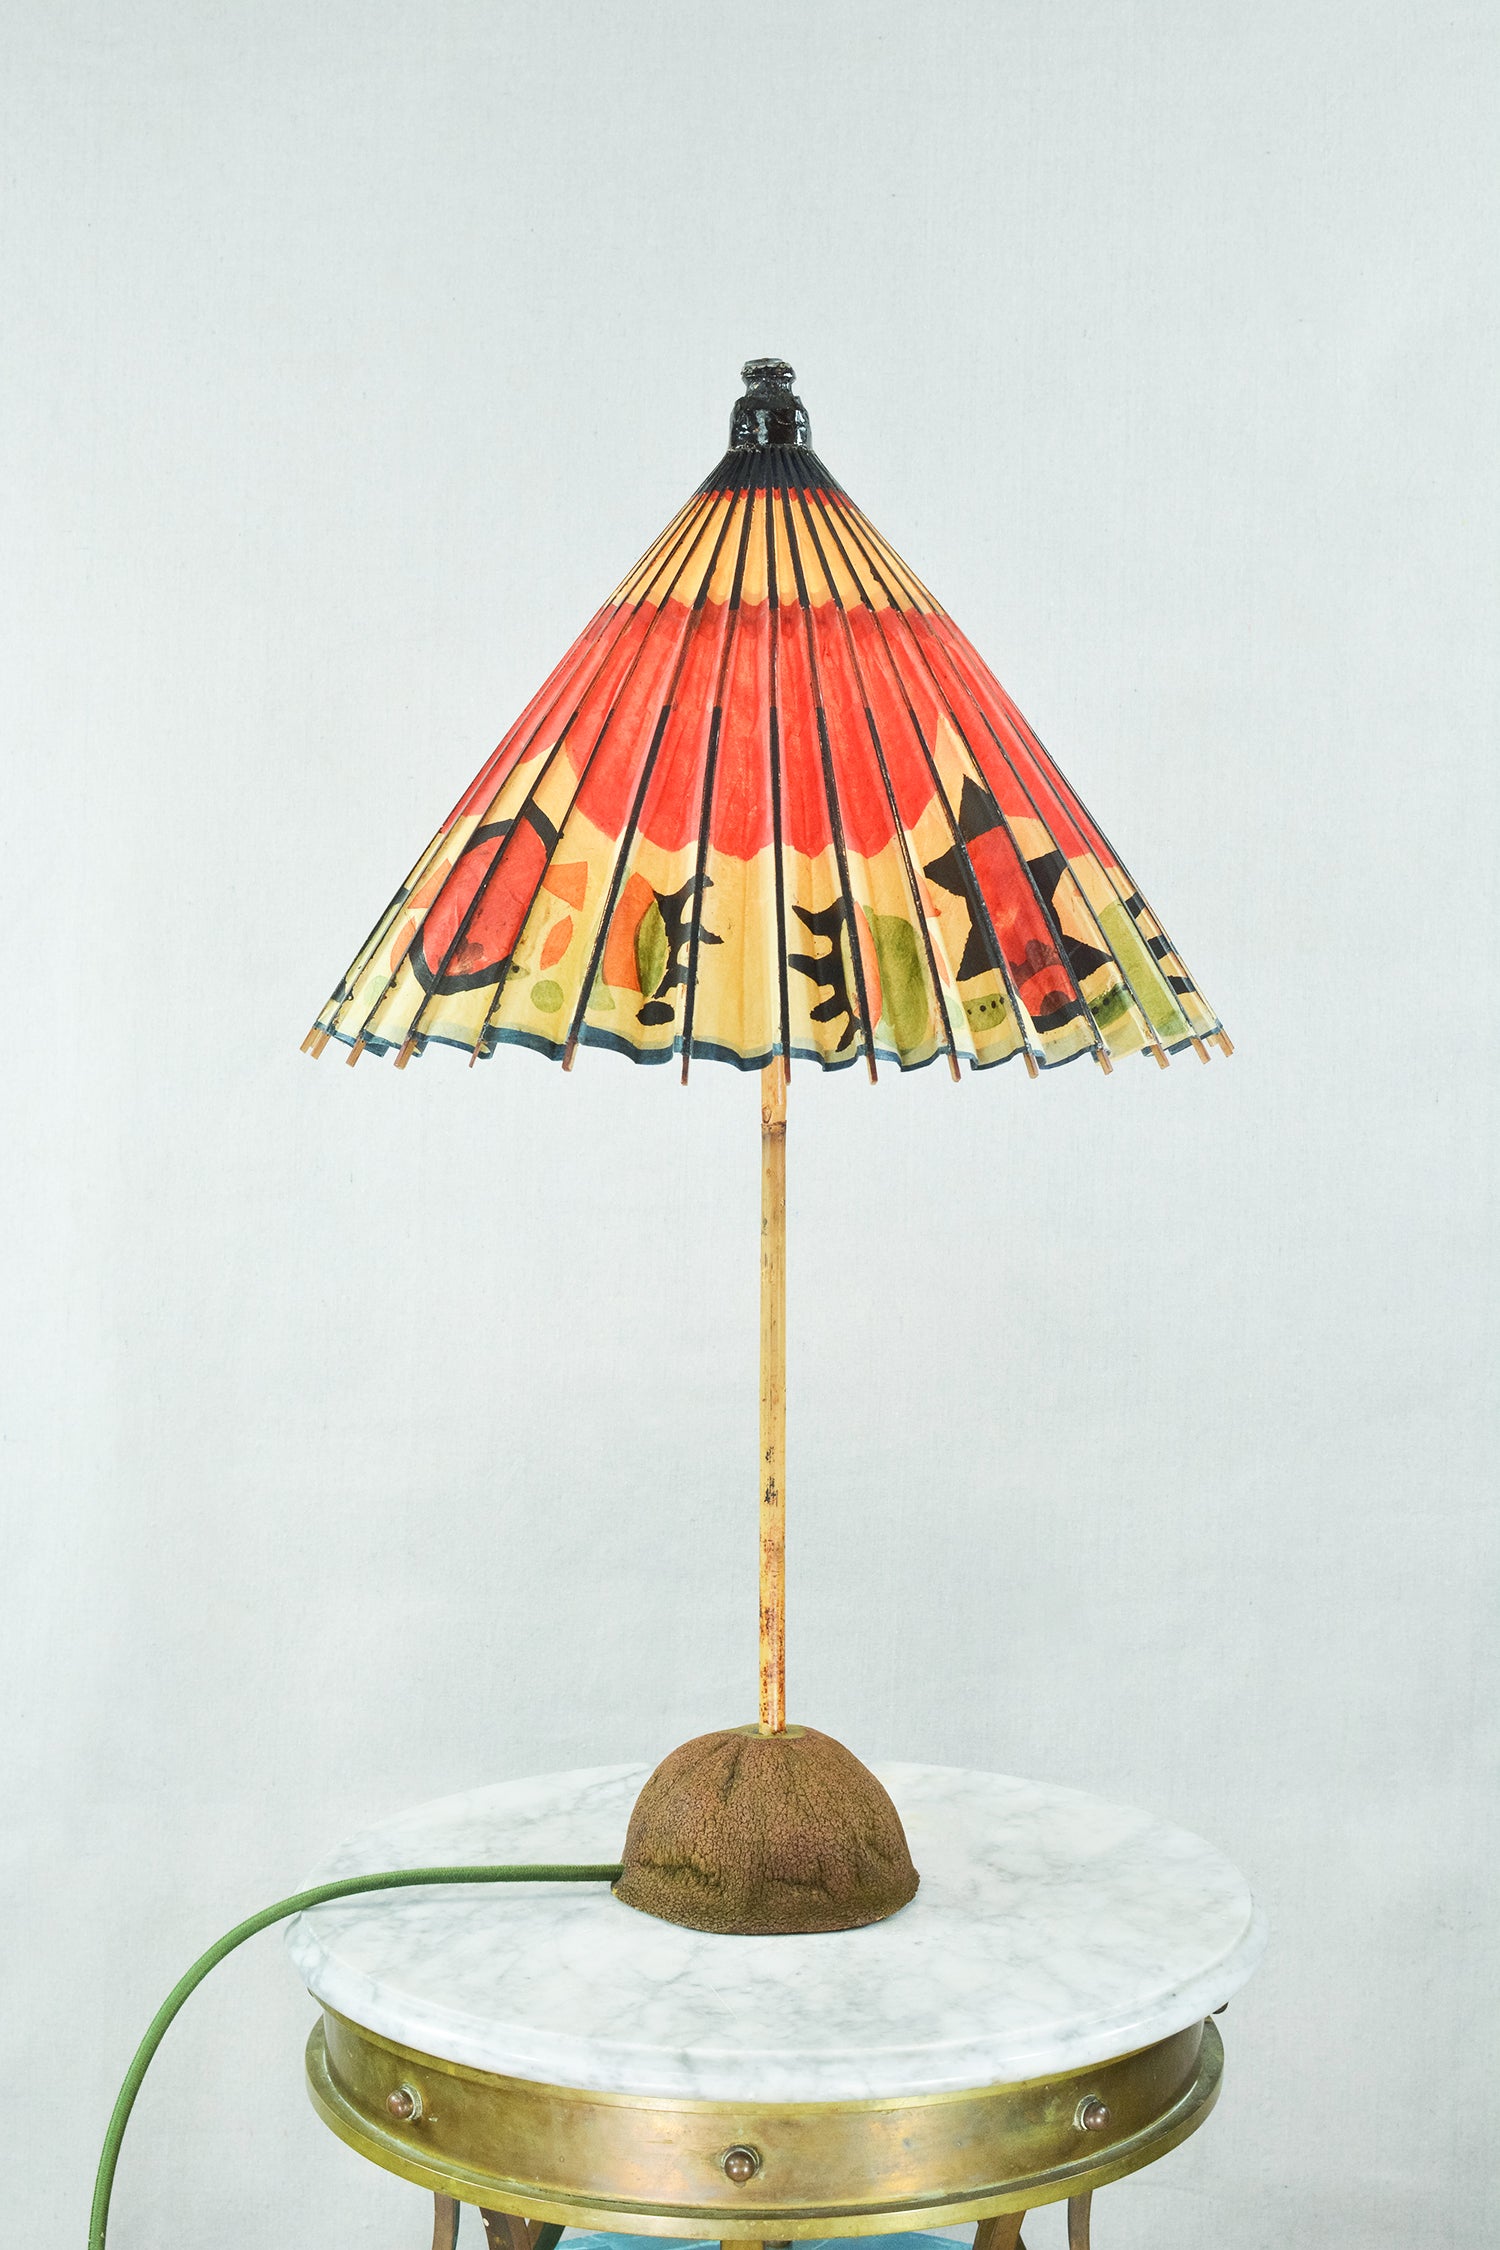 The One of One Collection is an ongoing series of single-edition floor and table lamps featuring shades made from particularly rare vintage paper parasols from our archive. 

Rest assured, you will never see another one like it.

Model No. 017 is a